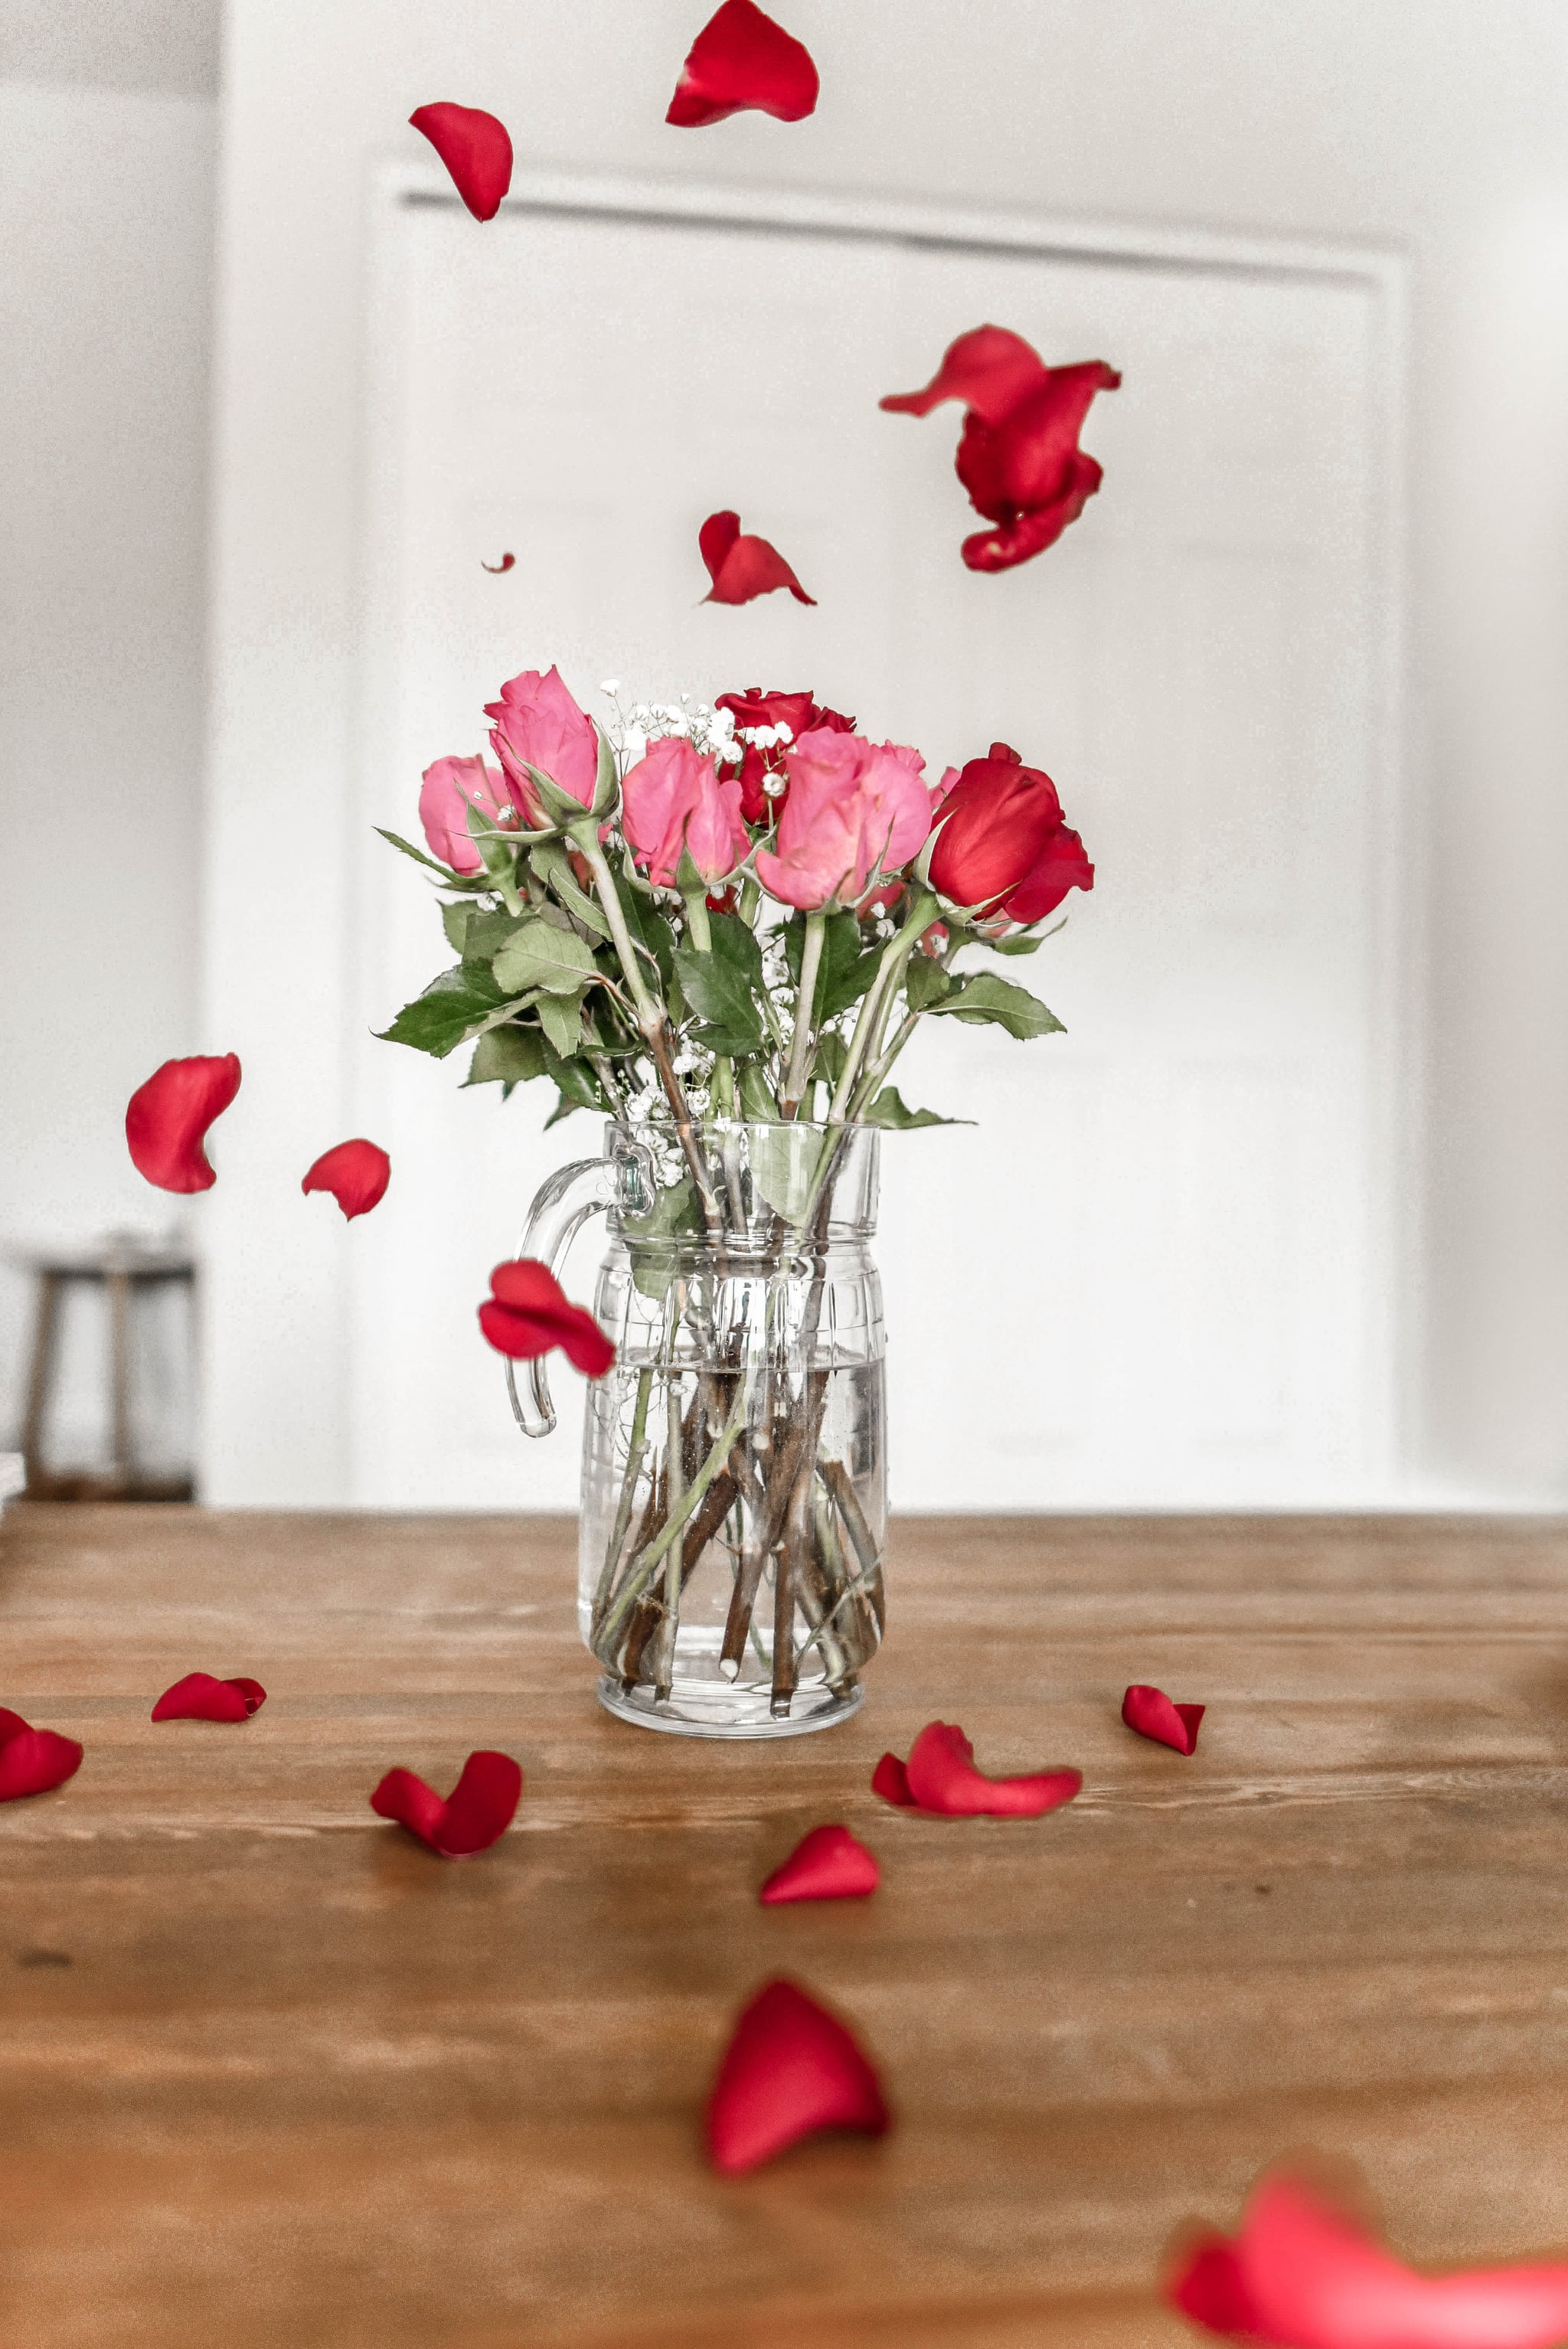 Valentine's Day Wallpapers For Your Home-Screen Aesthetic | POPSUGAR Tech